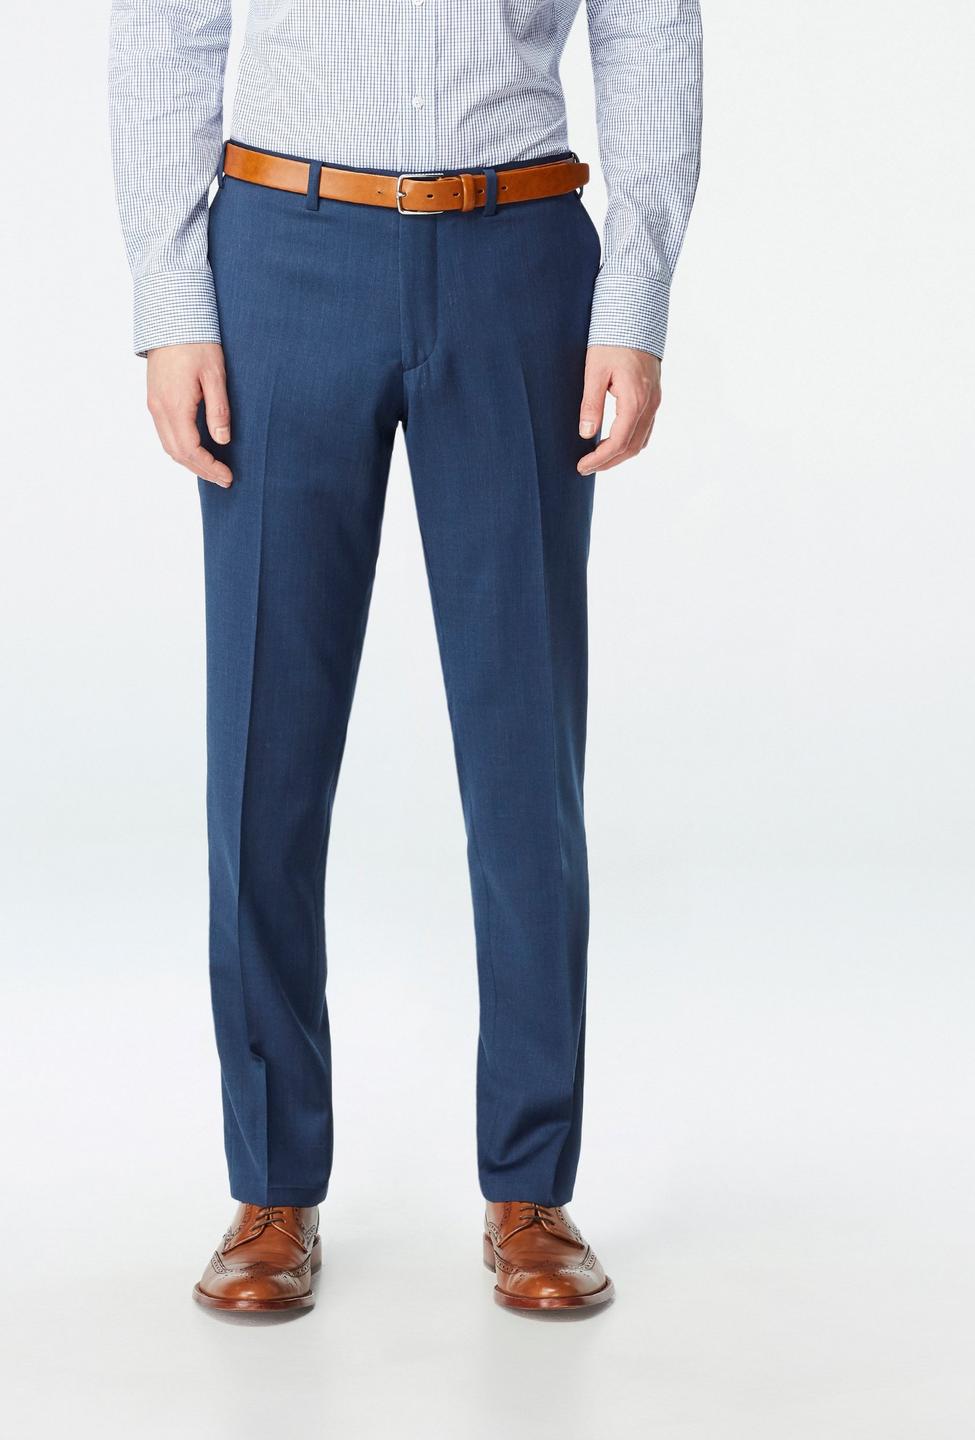 Blue pants - Hemsworth Solid Design from Premium Indochino Collection